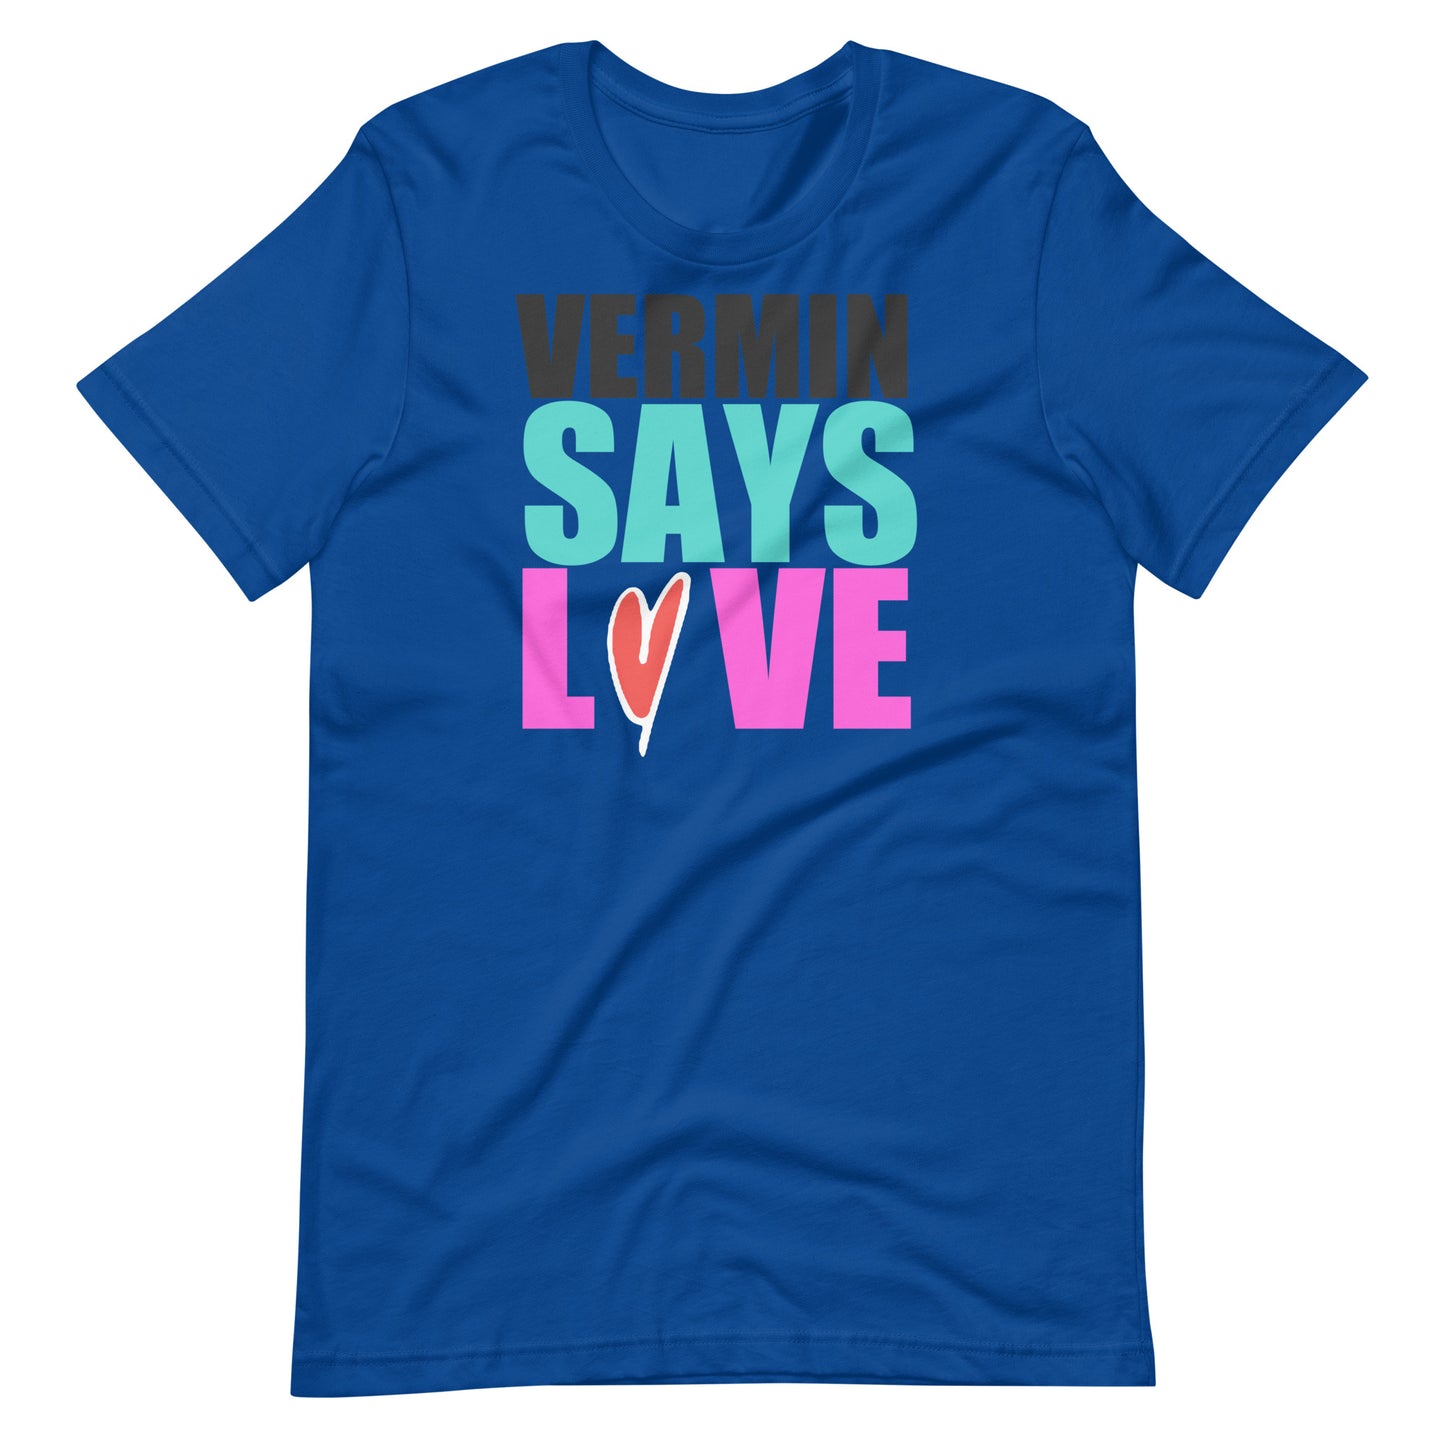 Relax and Love - Unisex t-shirt